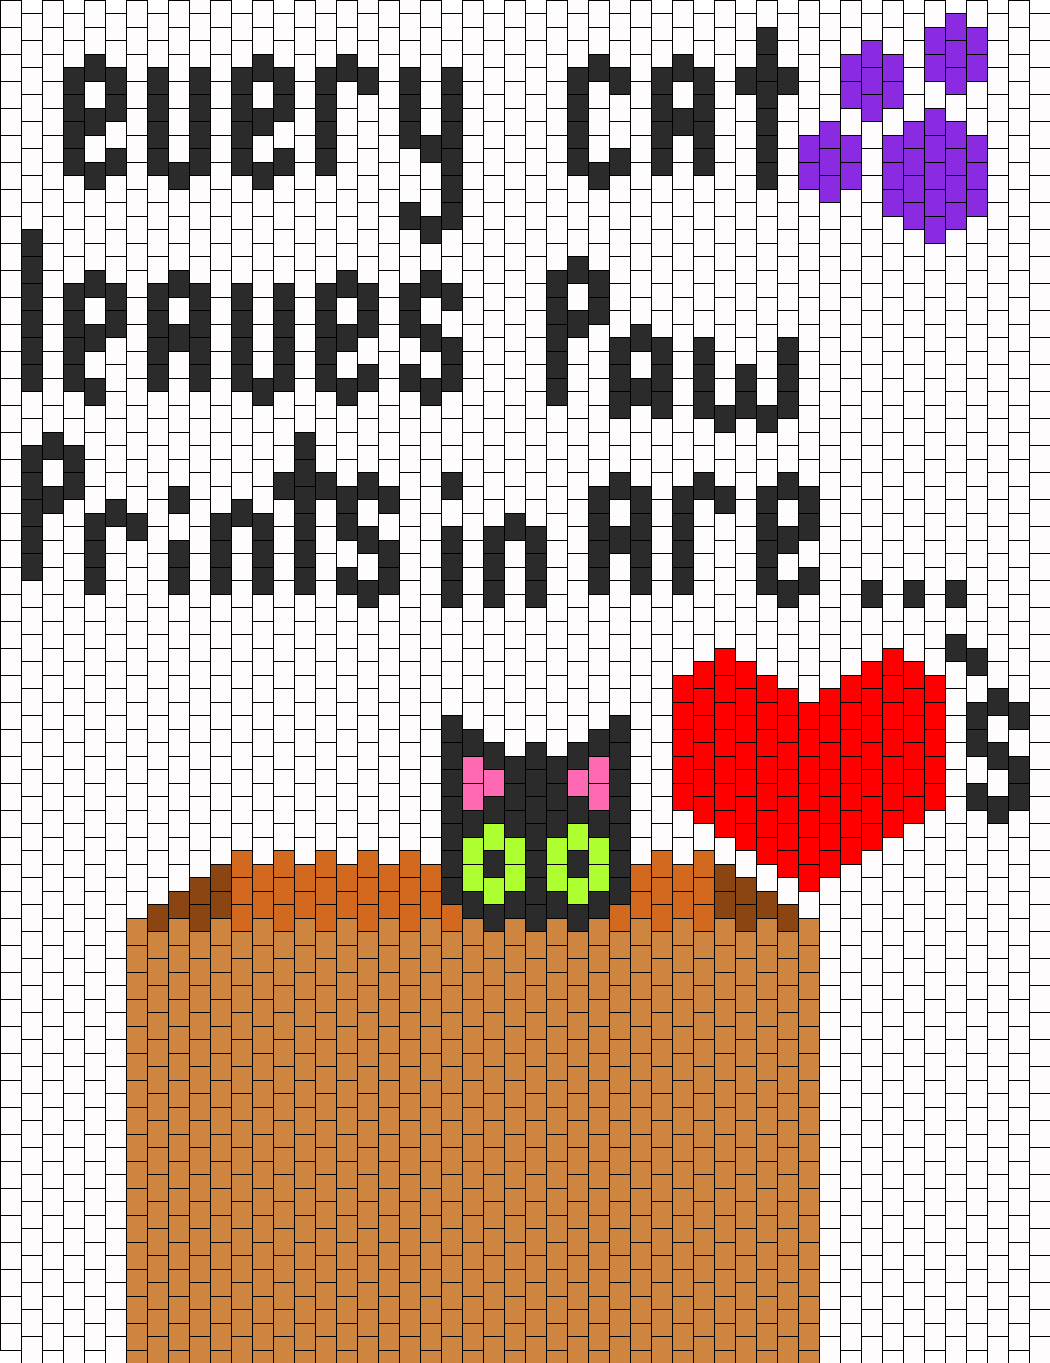 every_cat_leaves_paw_prints